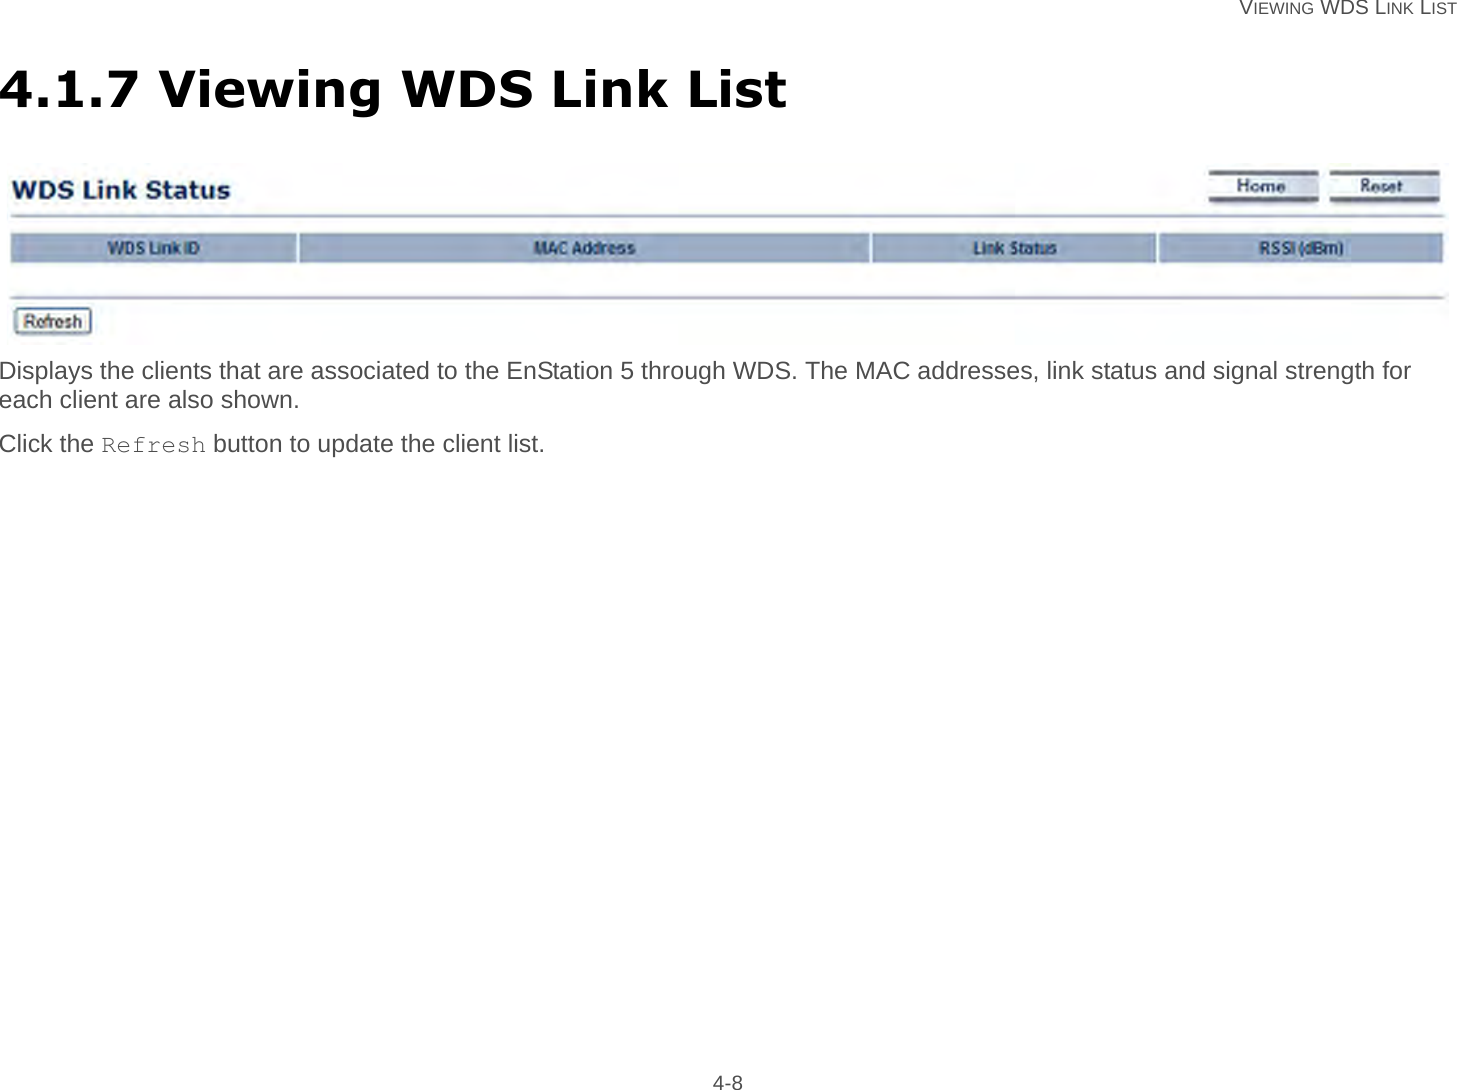   VIEWING WDS LINK LIST 4-84.1.7 Viewing WDS Link ListDisplays the clients that are associated to the EnStation 5 through WDS. The MAC addresses, link status and signal strength for each client are also shown.Click the Refresh button to update the client list.